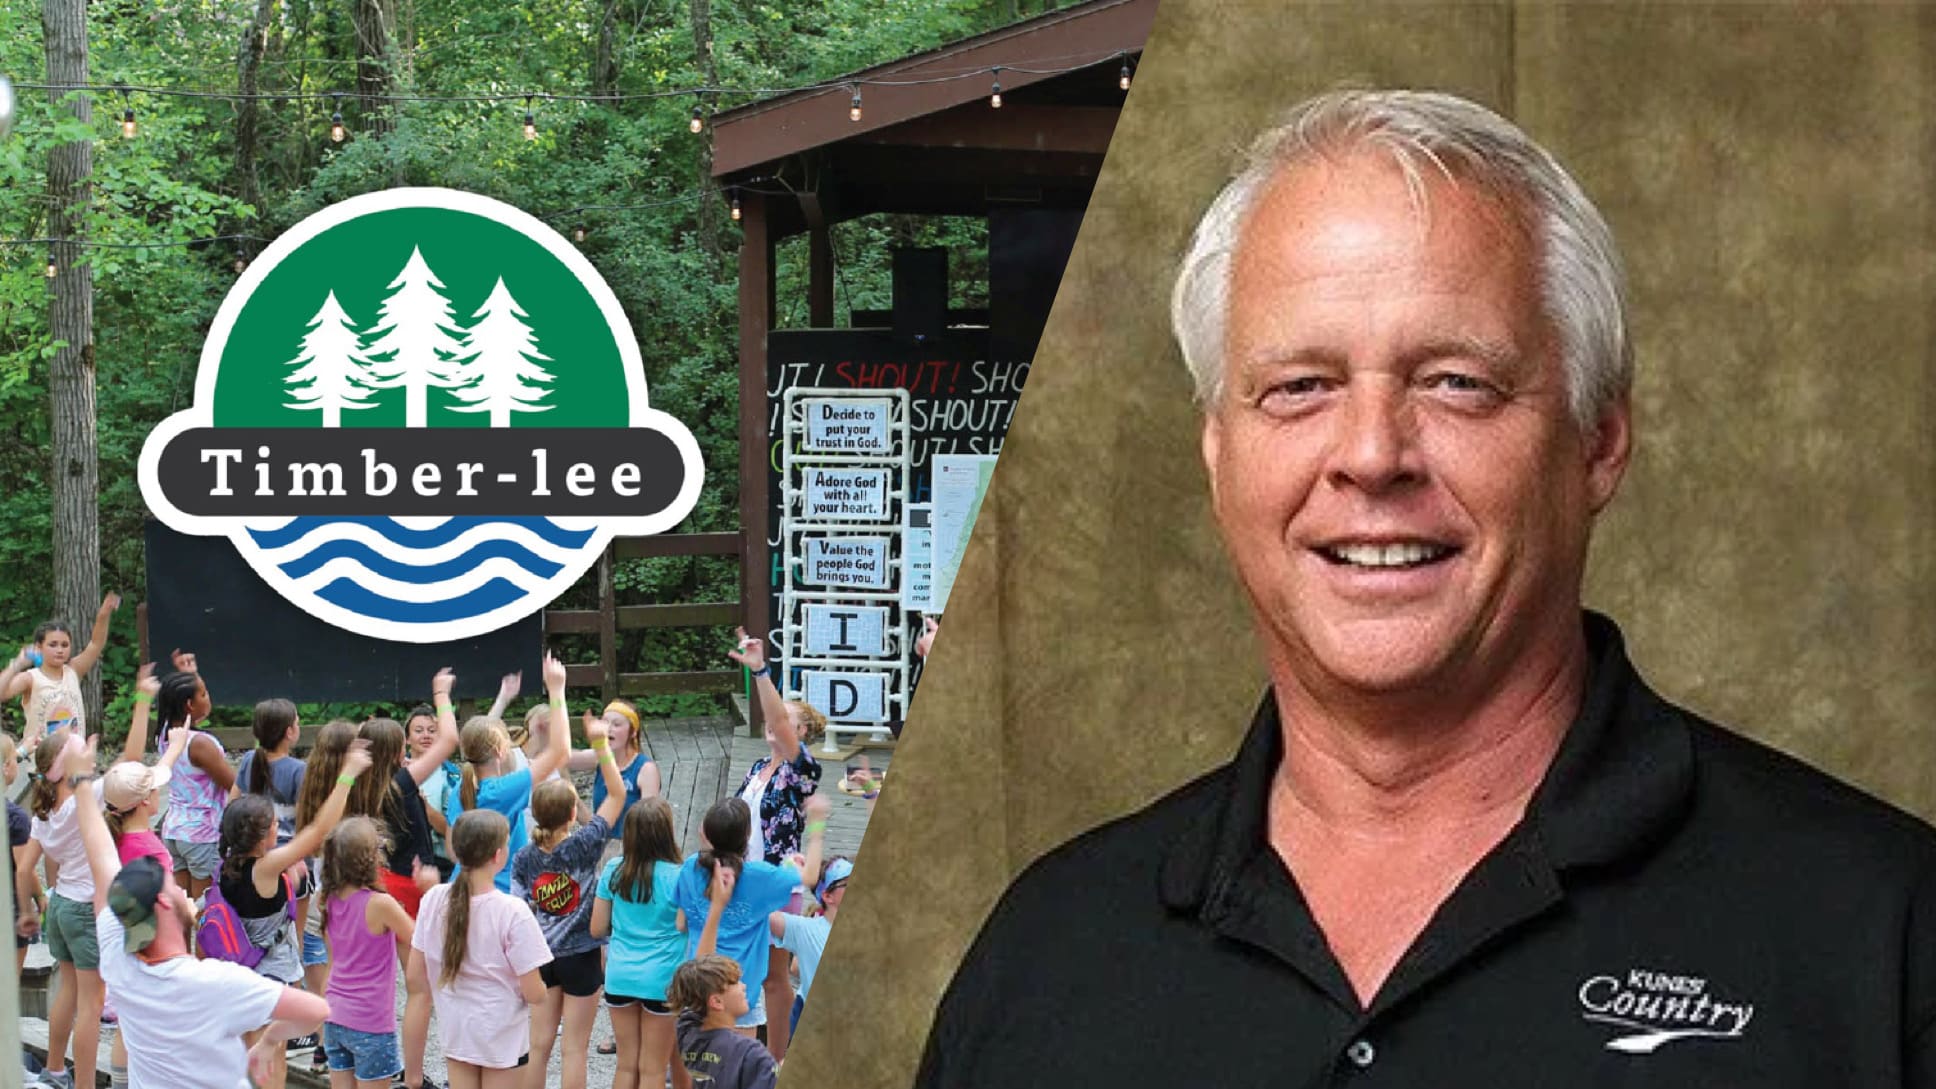 Camp Timber-lee to Remain Open, Businessman Agrees to Buy from TIU